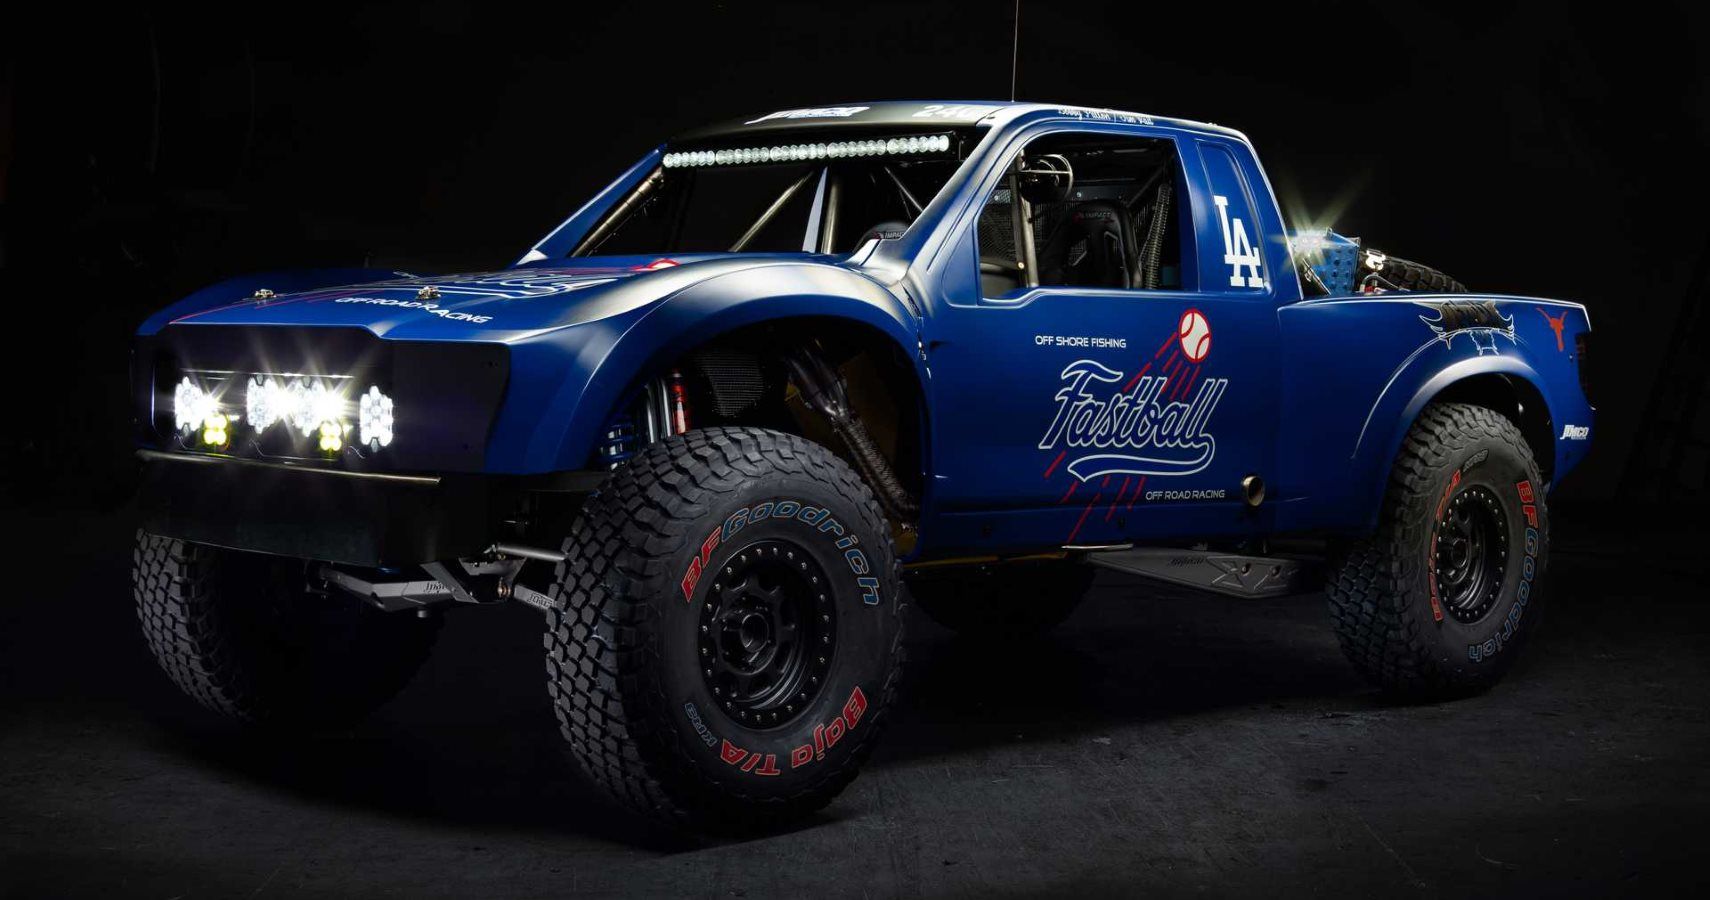 Check Out This Custom Ford Raptor Trophy Truck Built For A Baseball Player